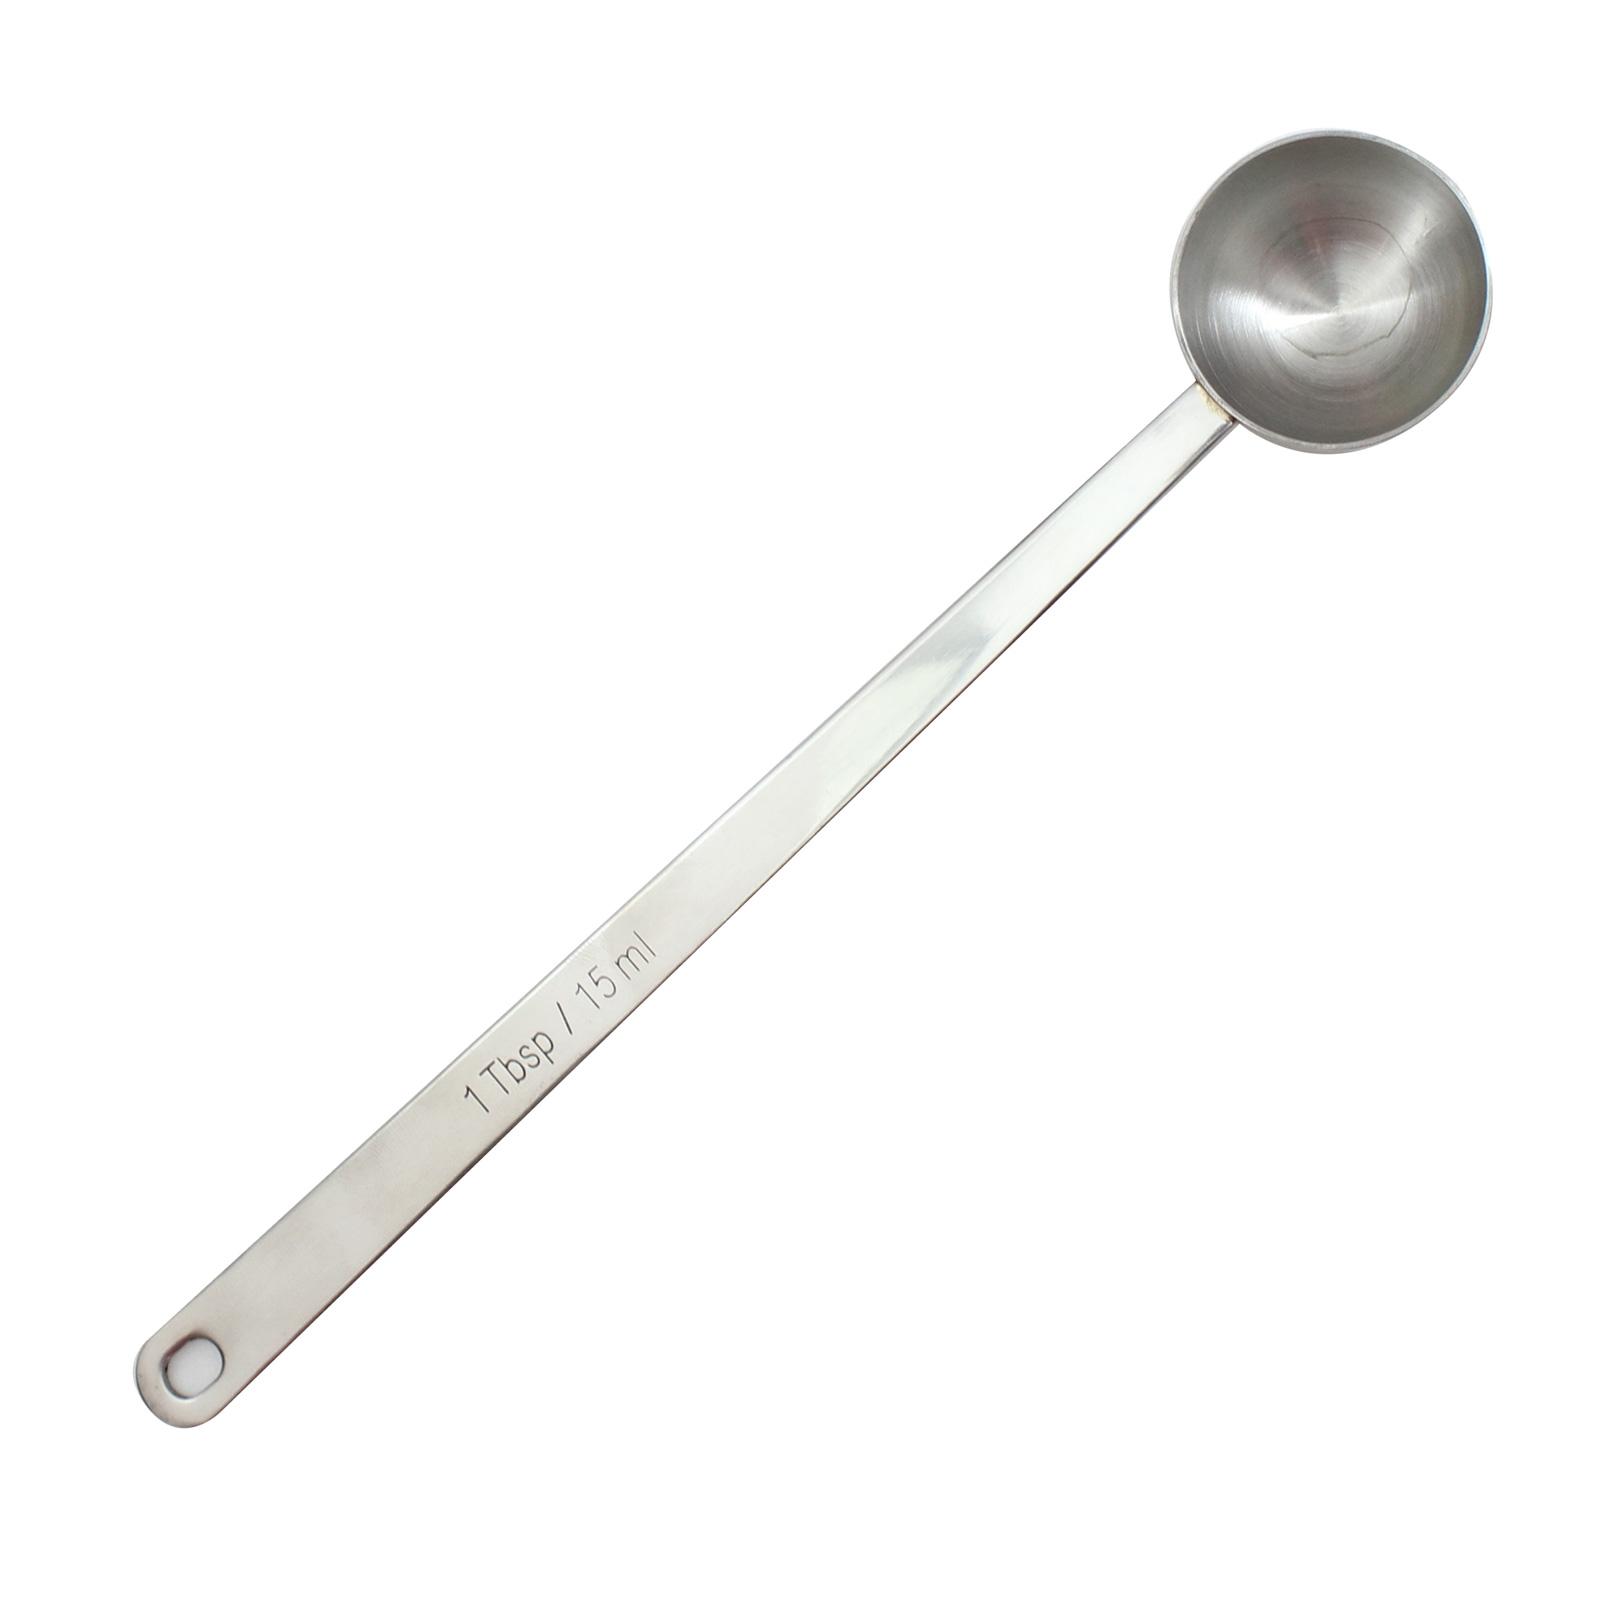 1 Tablespoon Measure Spoon Short Handle Scoops for Canisters by powbab.  Made in USA. Dual Use Powder Measure for 1 Teaspoon to 1 Tablespoon Scoop.